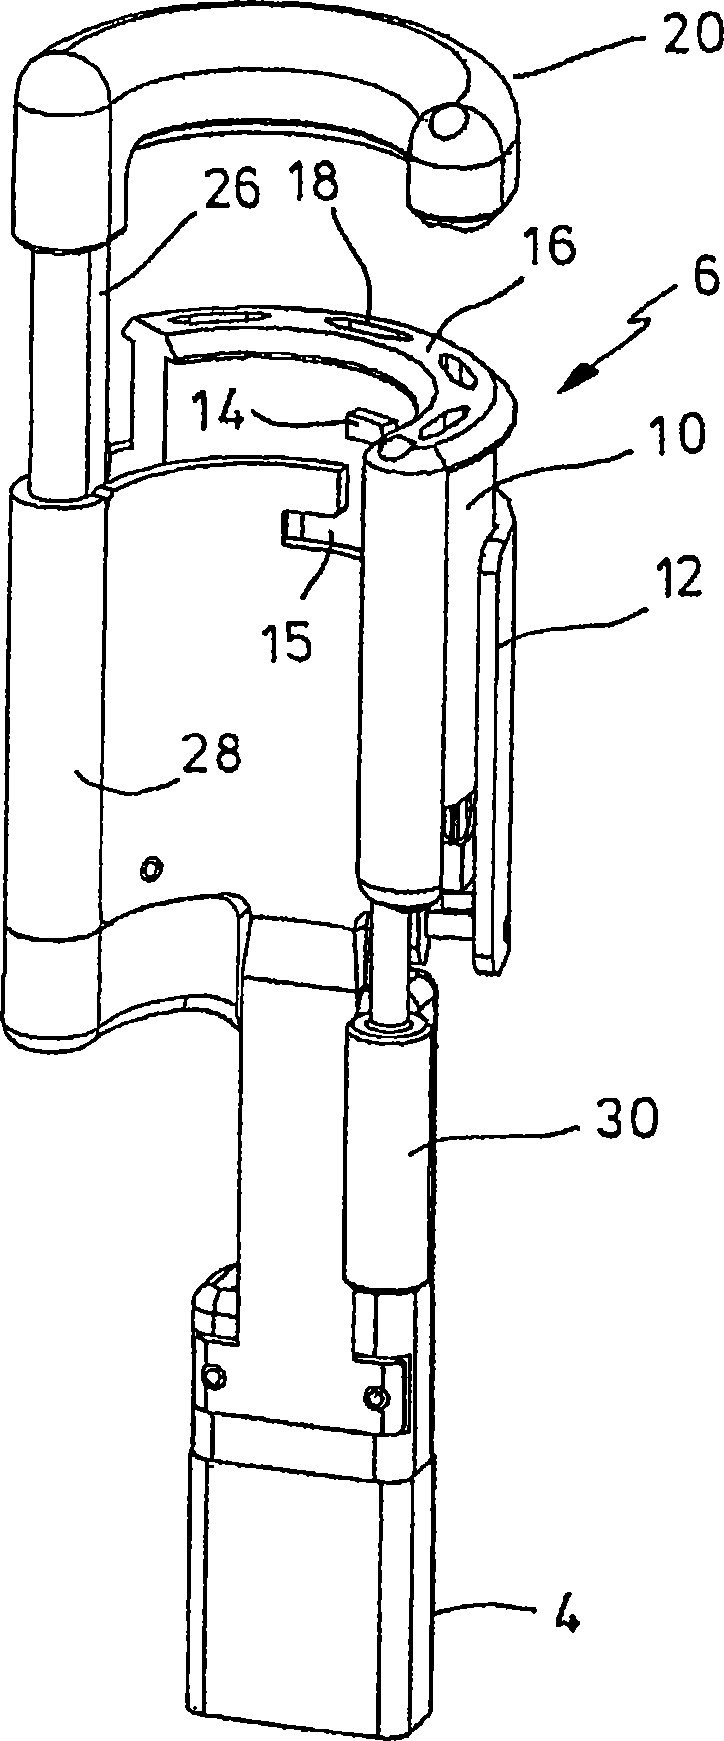 Surgical system with stapling instrument and retractor